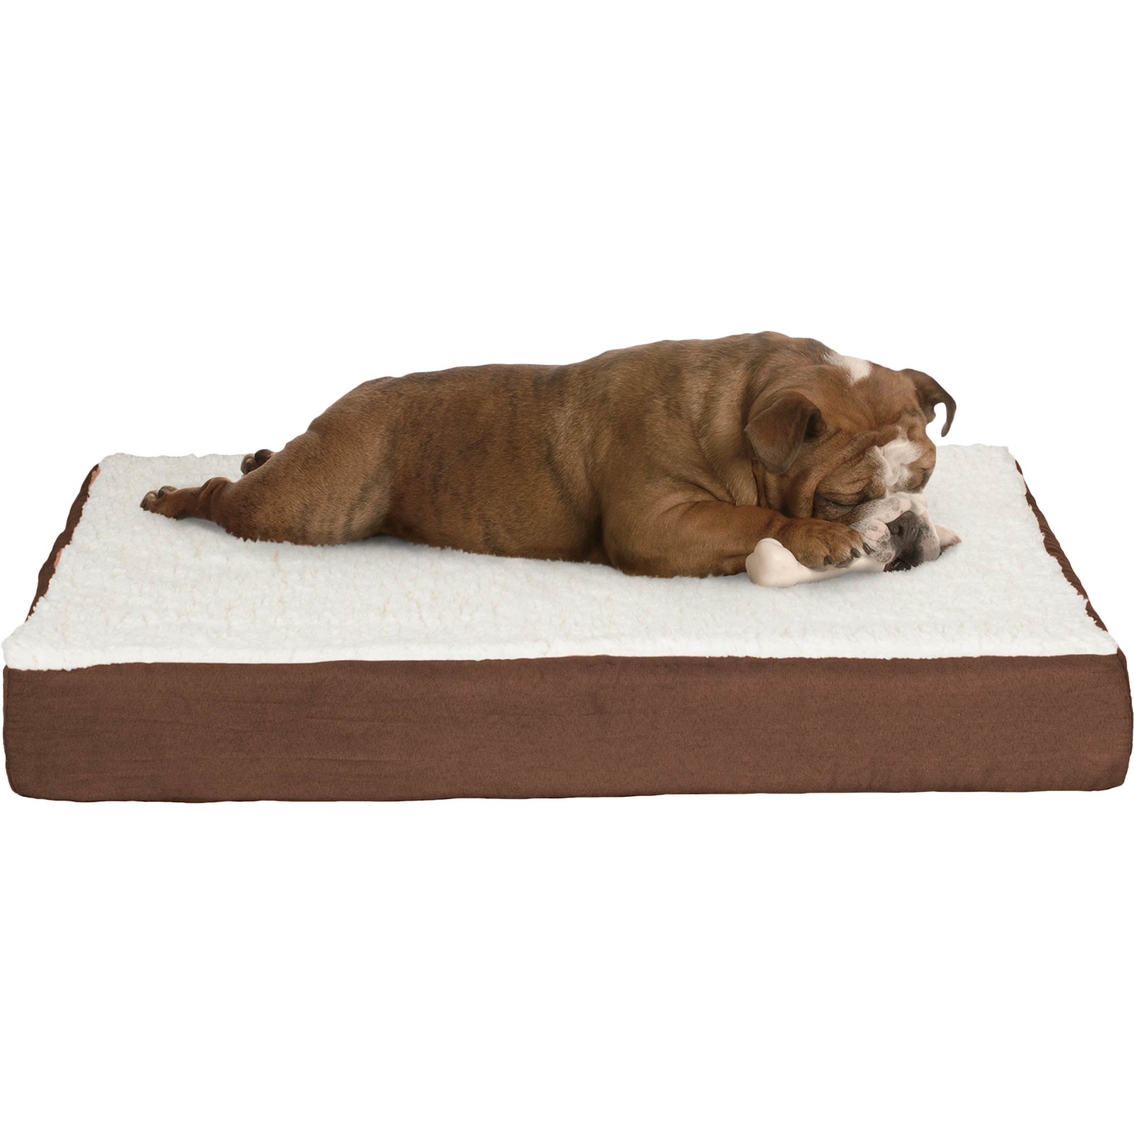 Petmaker Orthopedic Sherpa Top Pet Bed with Memory Foam and Removable Cover - Image 2 of 6